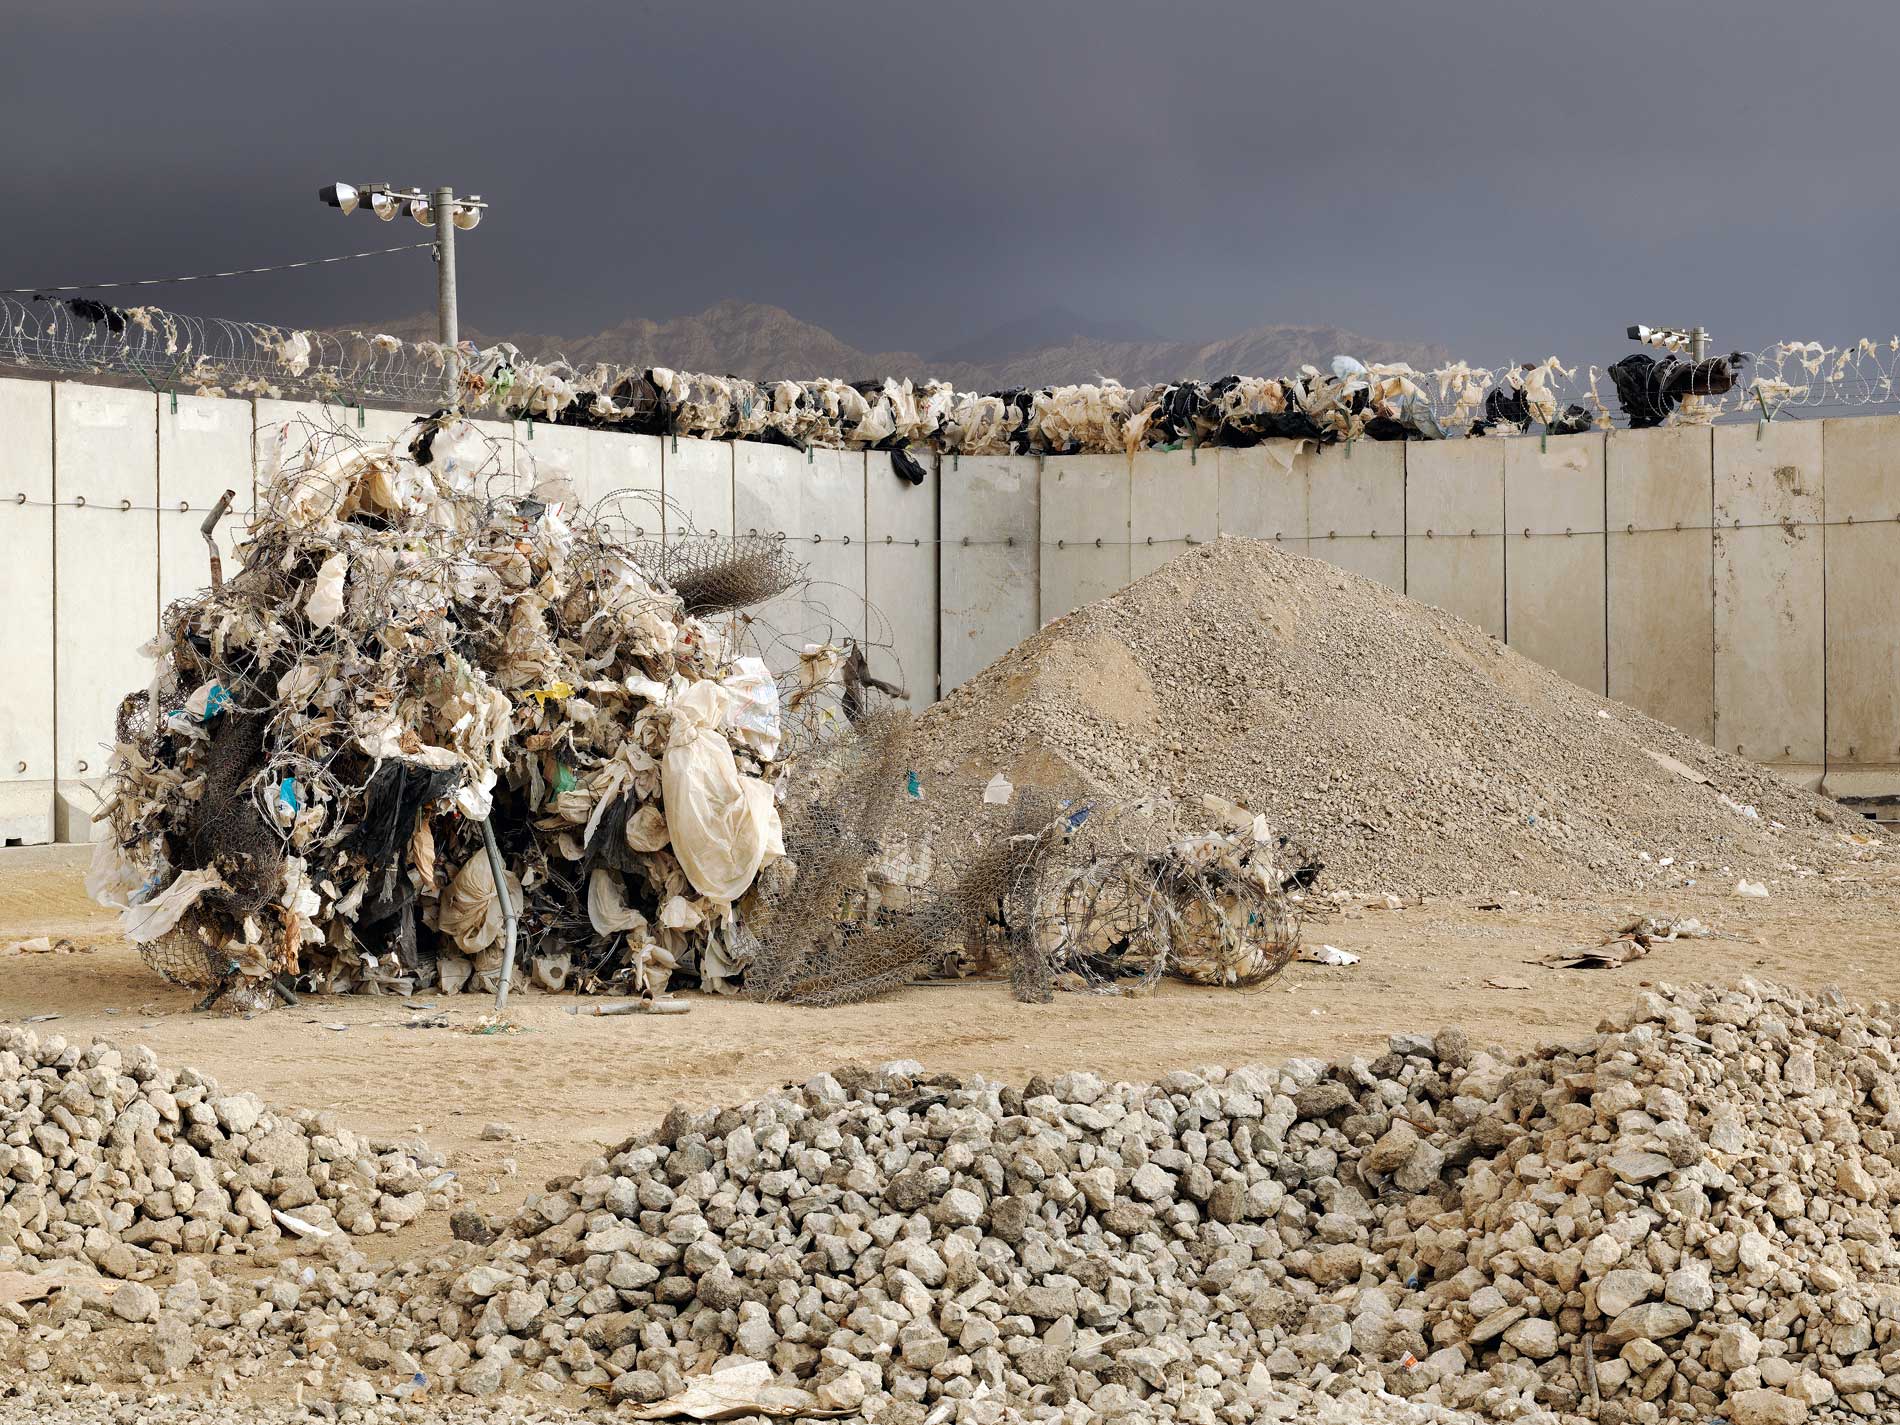 Wired Rawfile: The Mountains Of MajeedScene from Bagram Airfield U.S. military base in Afghanistan.